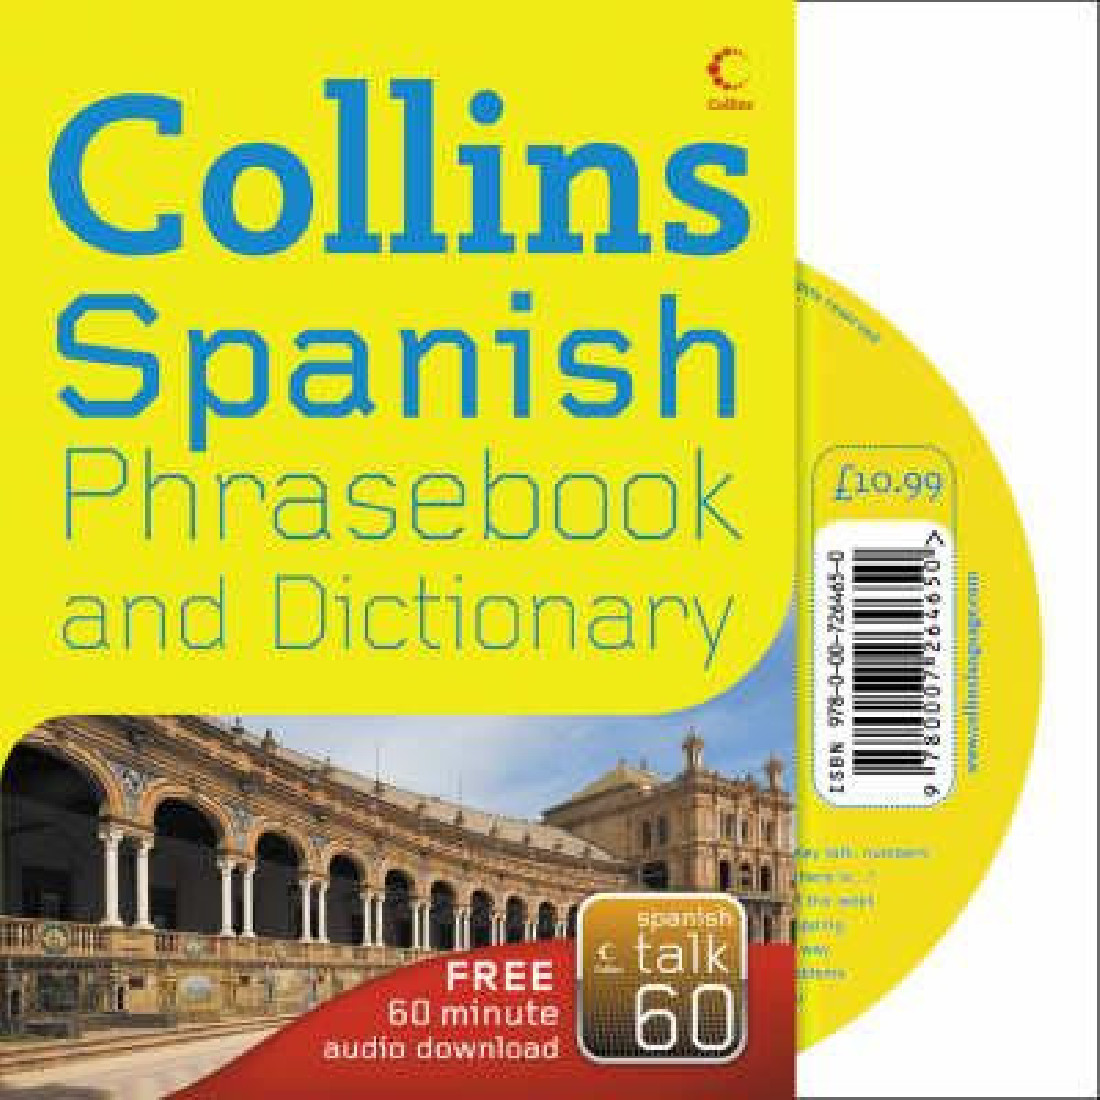 SPANISH PHRASEBOOK AND DICTIONARY CD PACK (+ CD) PB